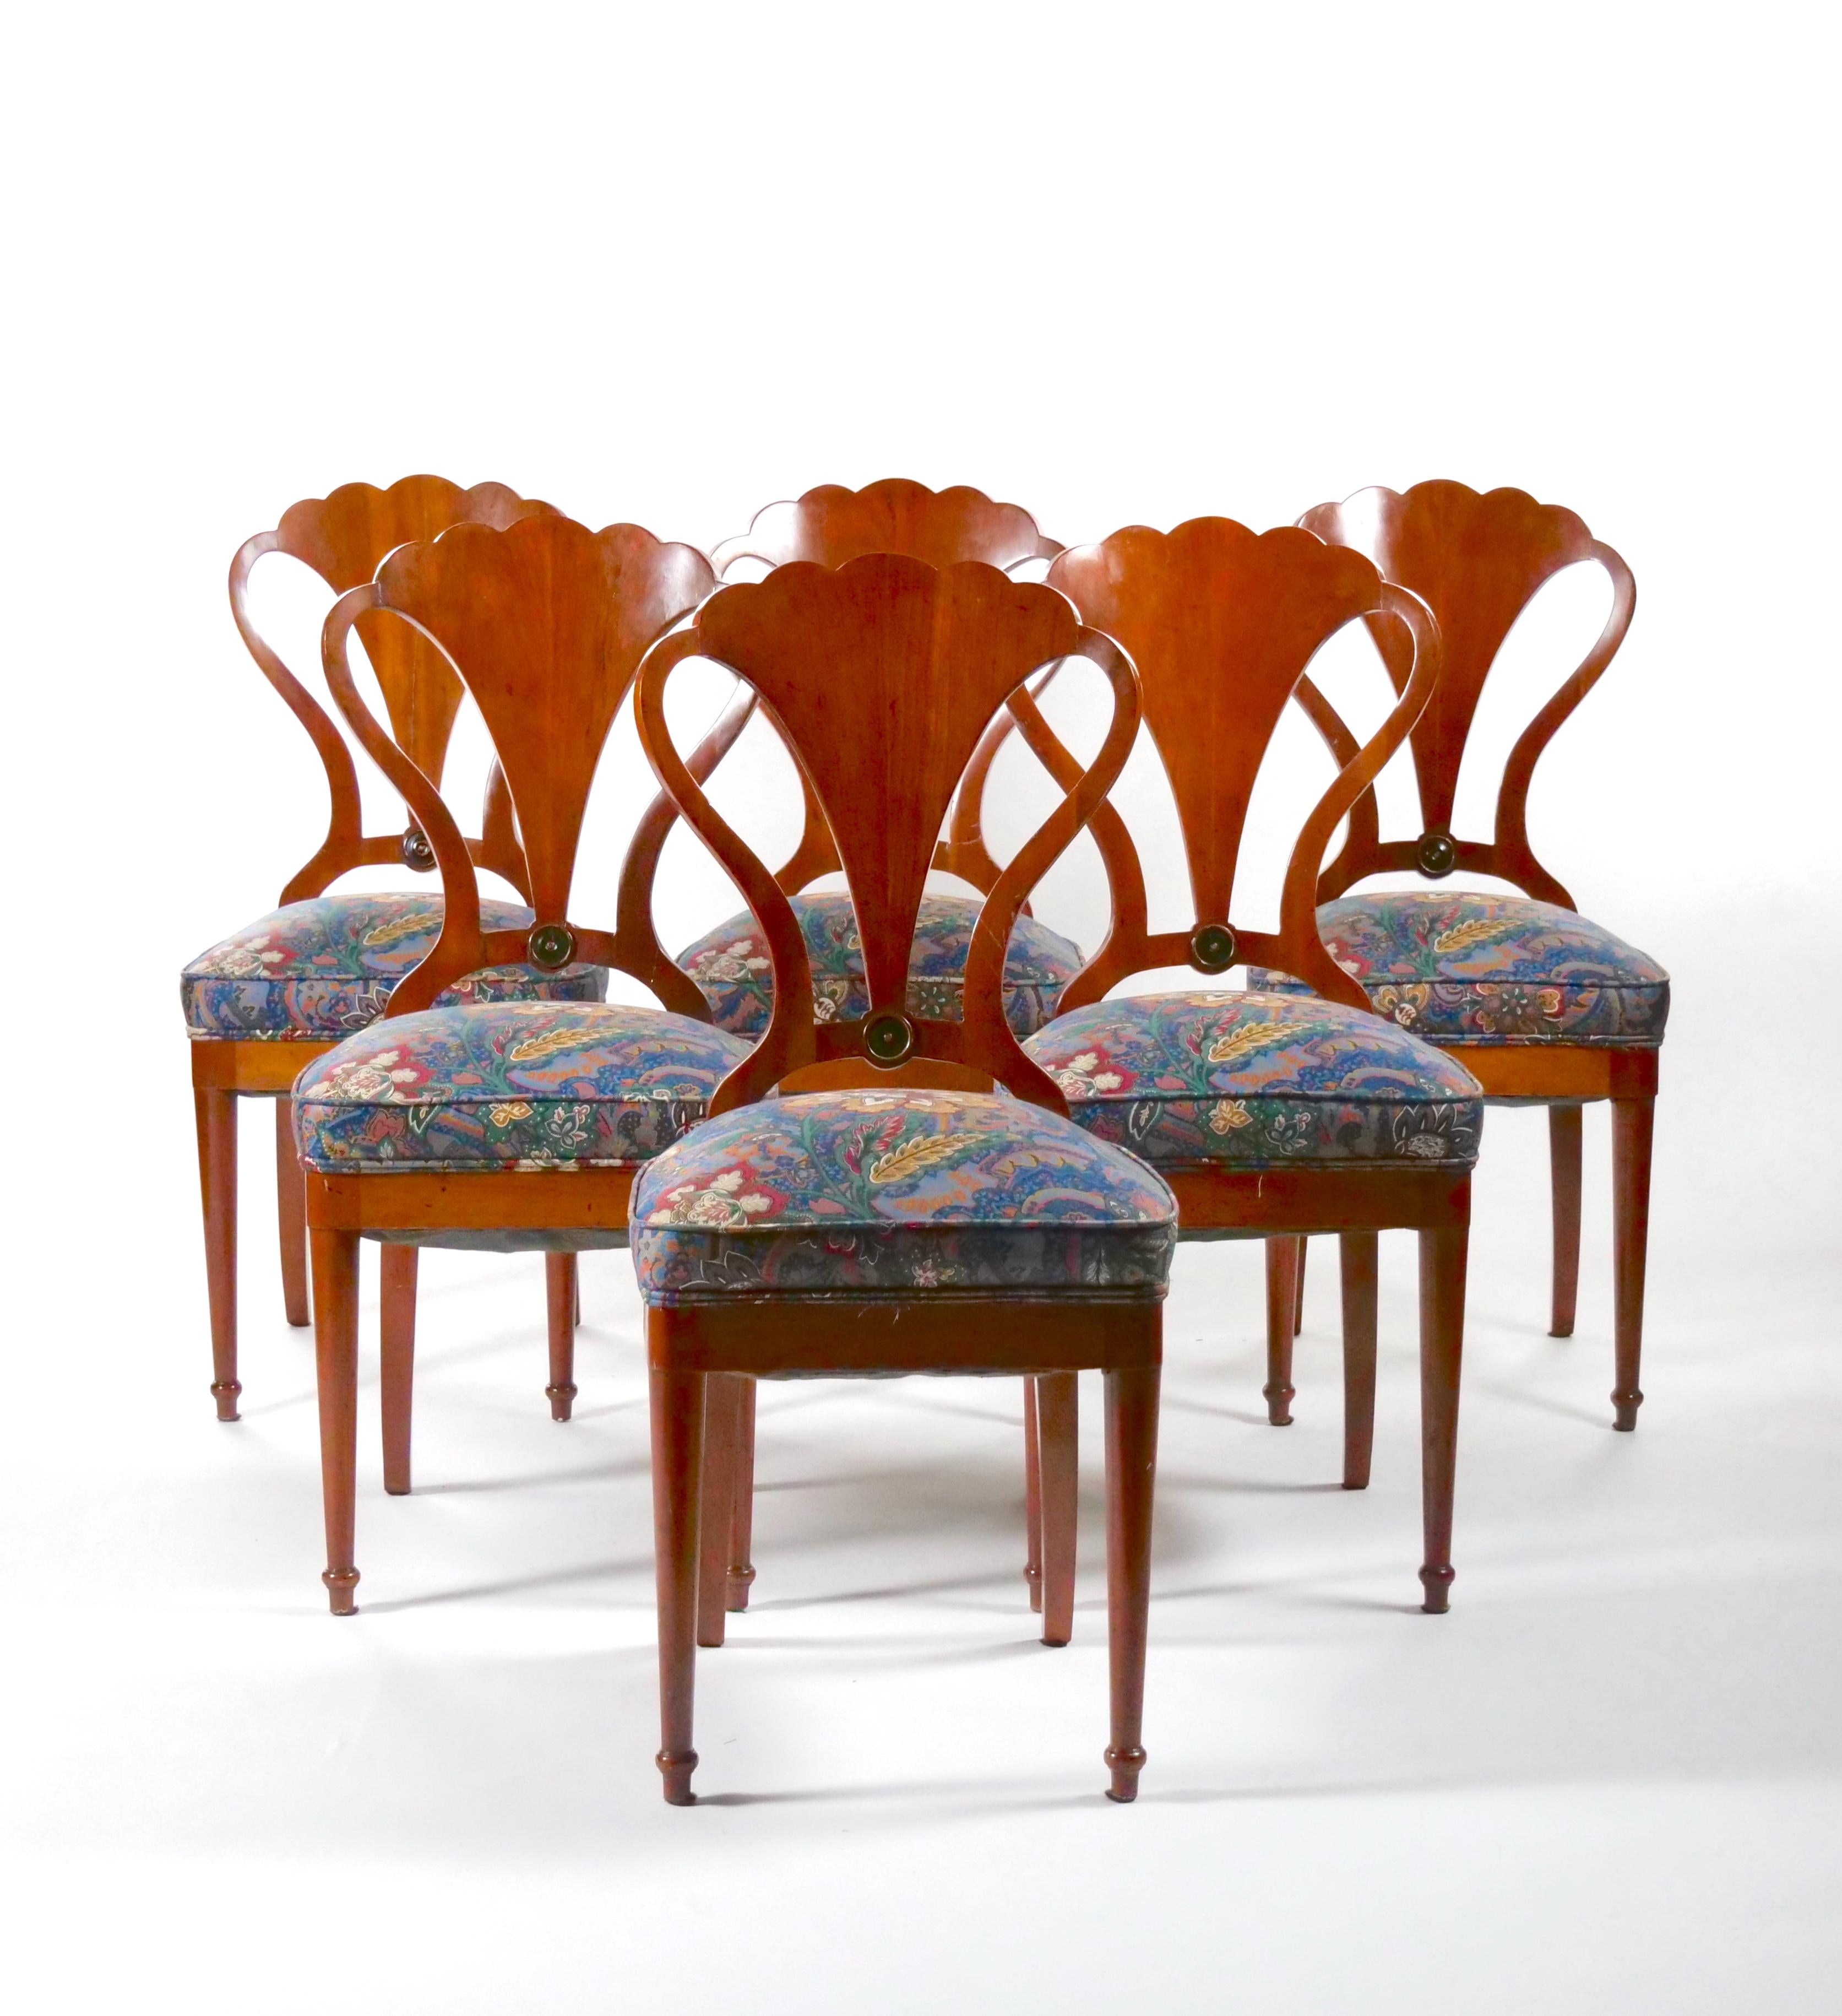 Beautiful Art Nouveau / Art Deco style mahogany wood frame and back set of six dining chairs. The chair features an elaborate hand card mahogany wood shield shaped backs resting on four tapered legs. Each one is upholstered in a cotton blend floral